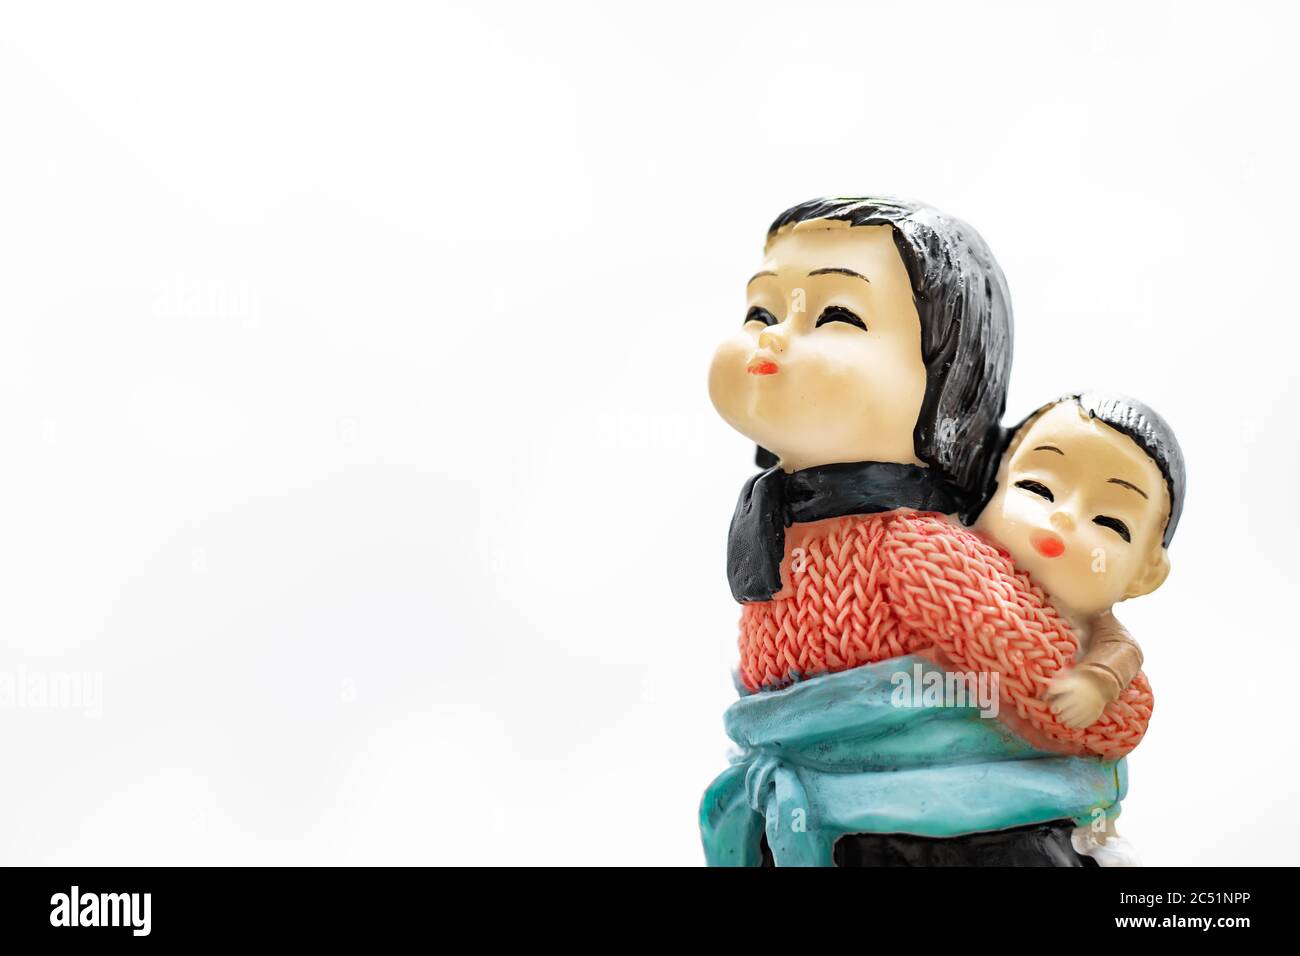 Concept of motherhood. Figurine of Korean mother with baby son. Stock Photo